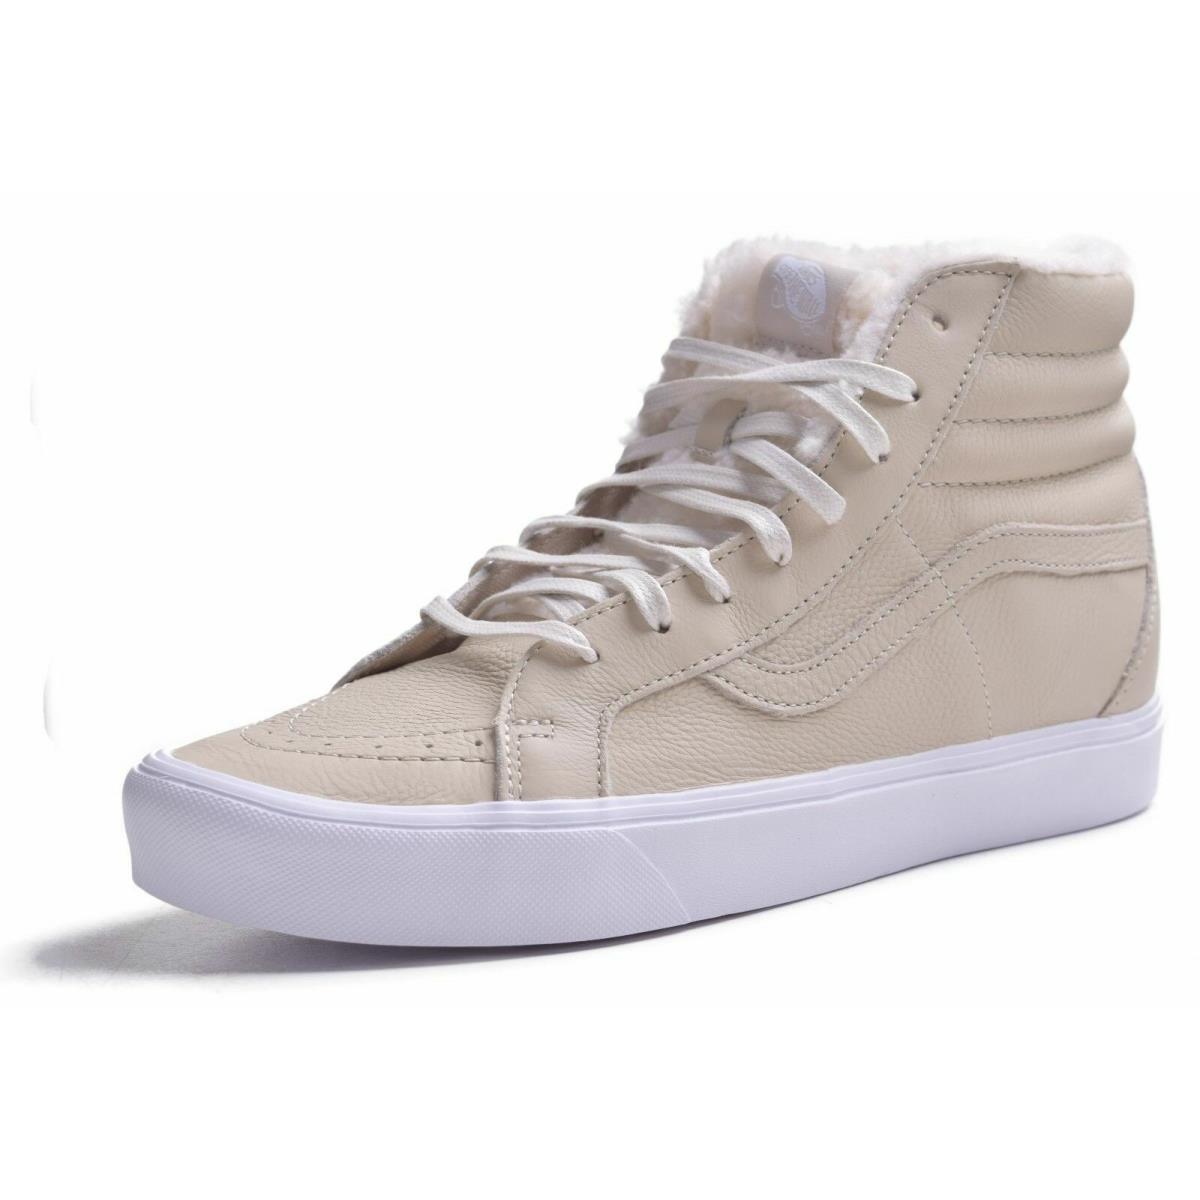 Vans Sk8 Hi Classic Sherpa Cement Taupe Leather Skateboard Shoes Mens Womens - Cement Taupe